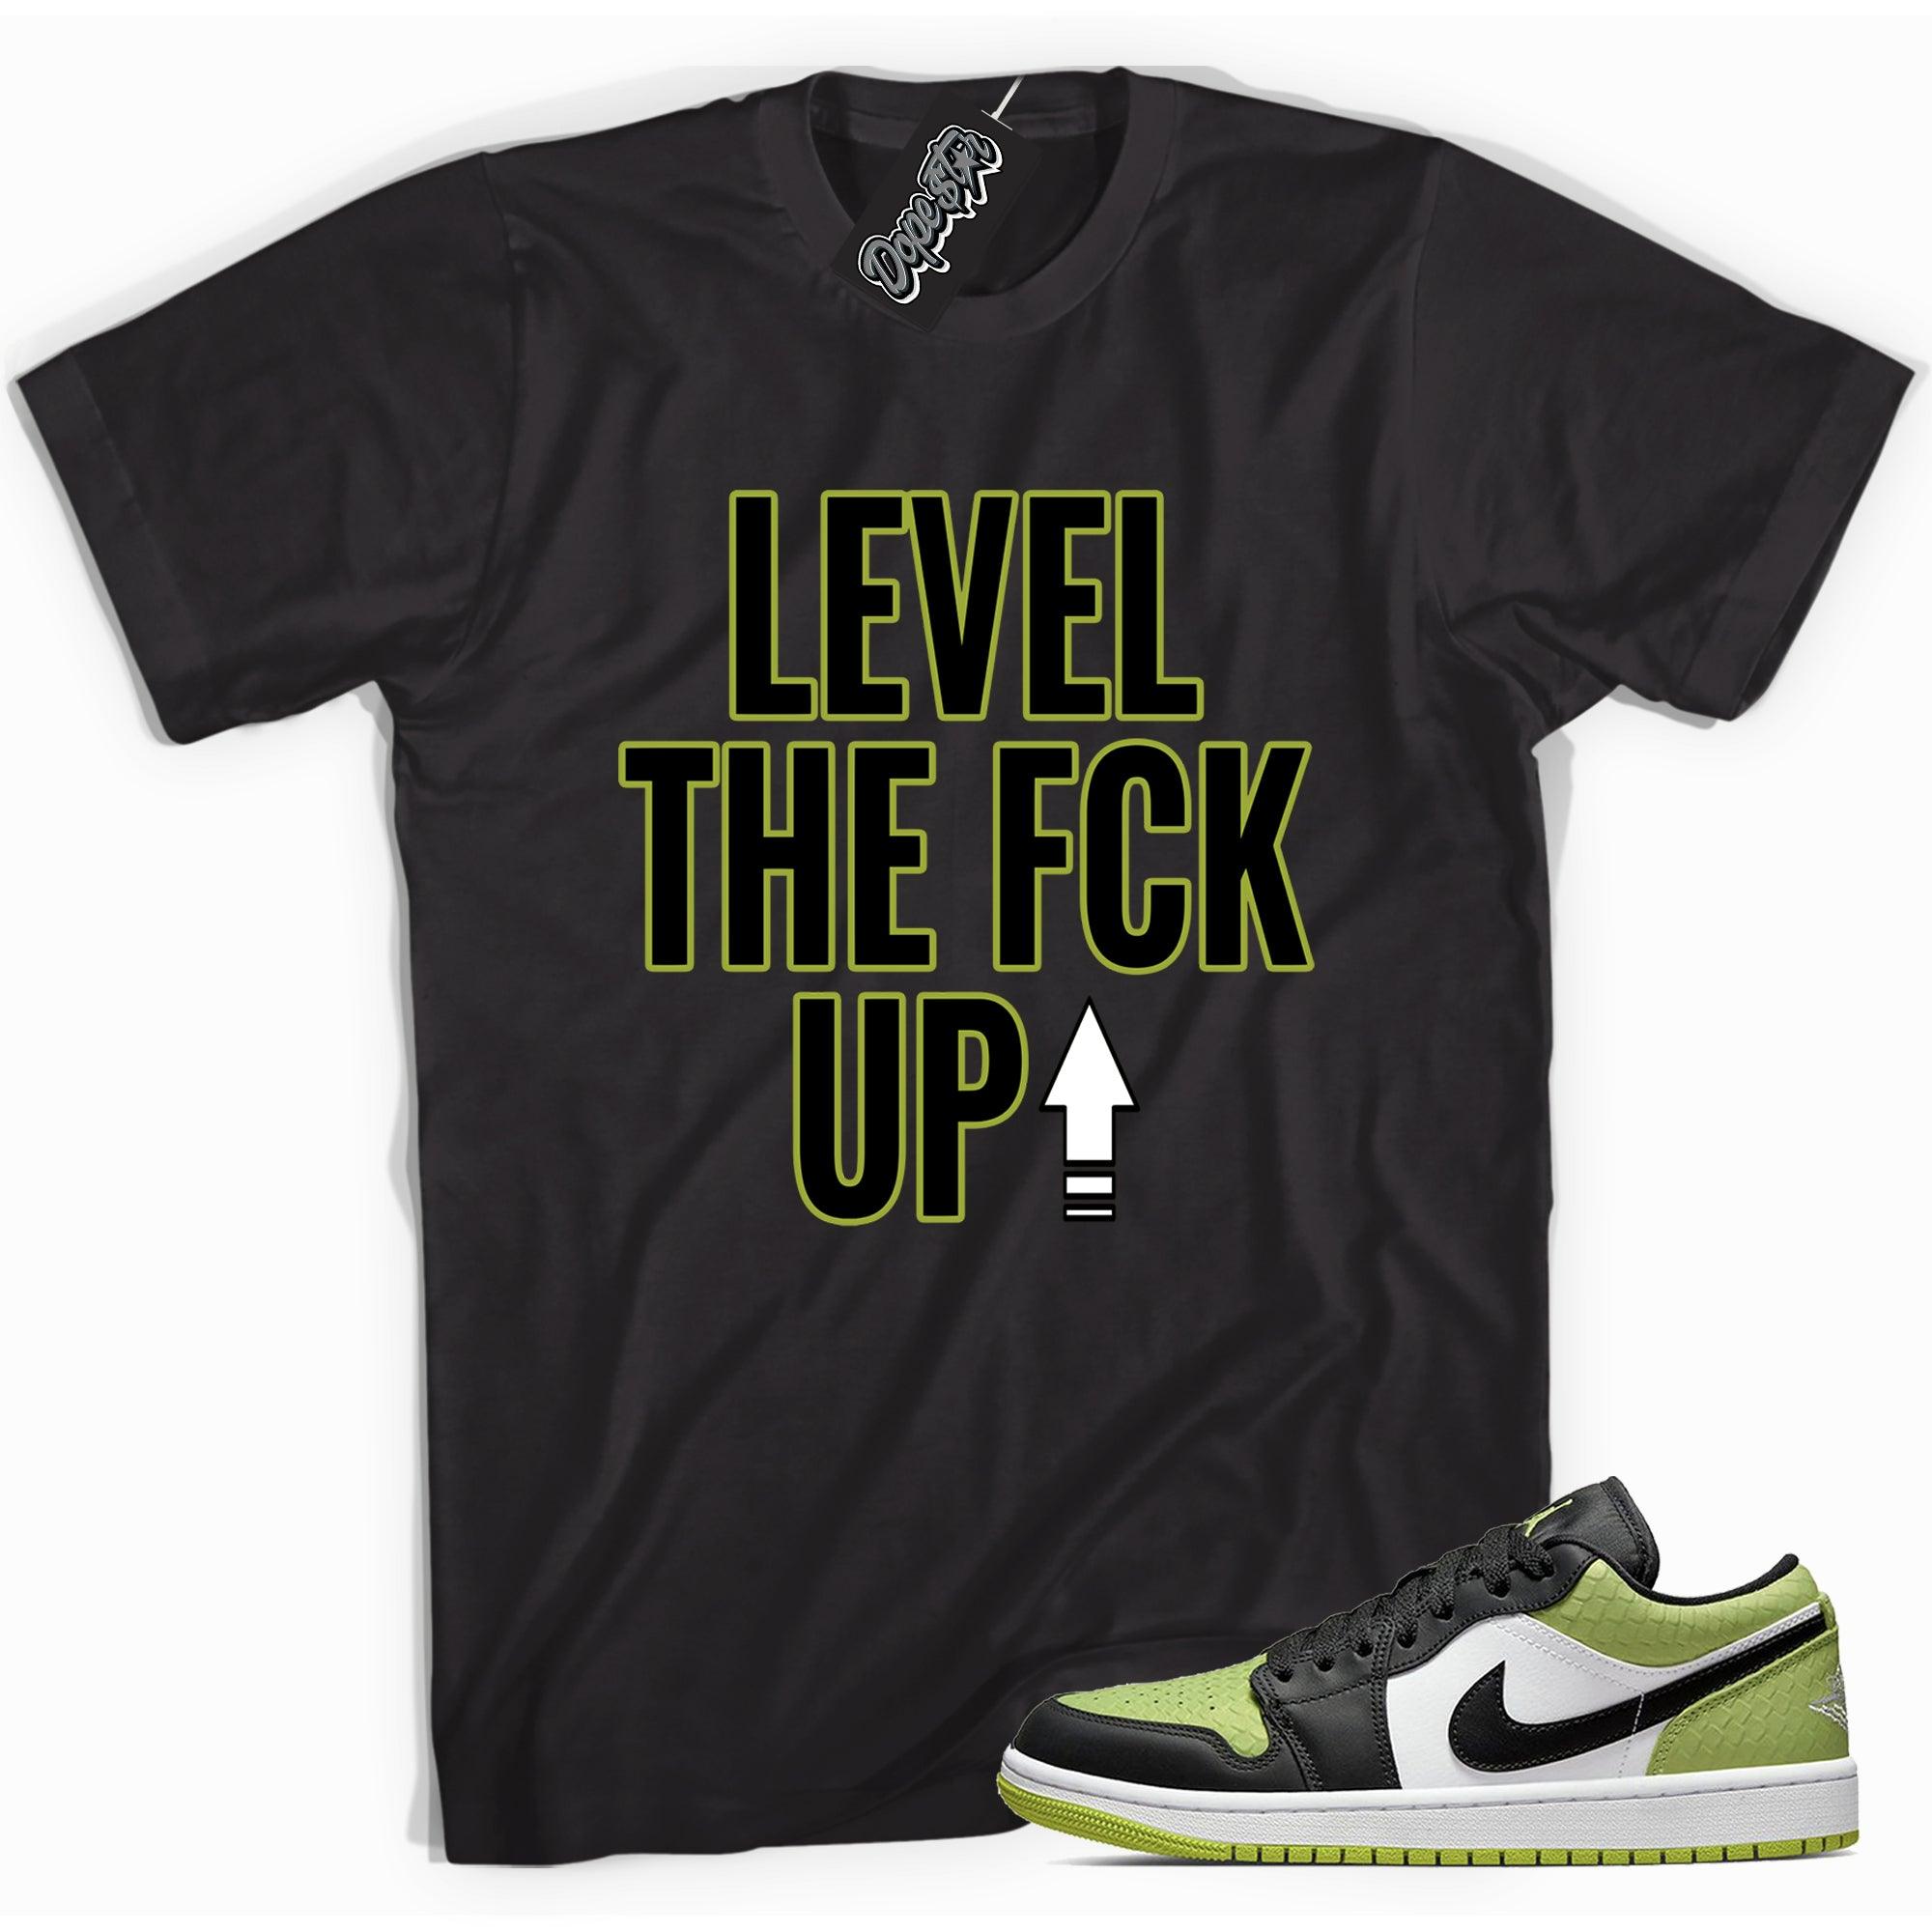 Cool black graphic tee with 'Level Up' print, that perfectly matches Air Jordan 1 Low Snakeskin Vivid Green sneakers.